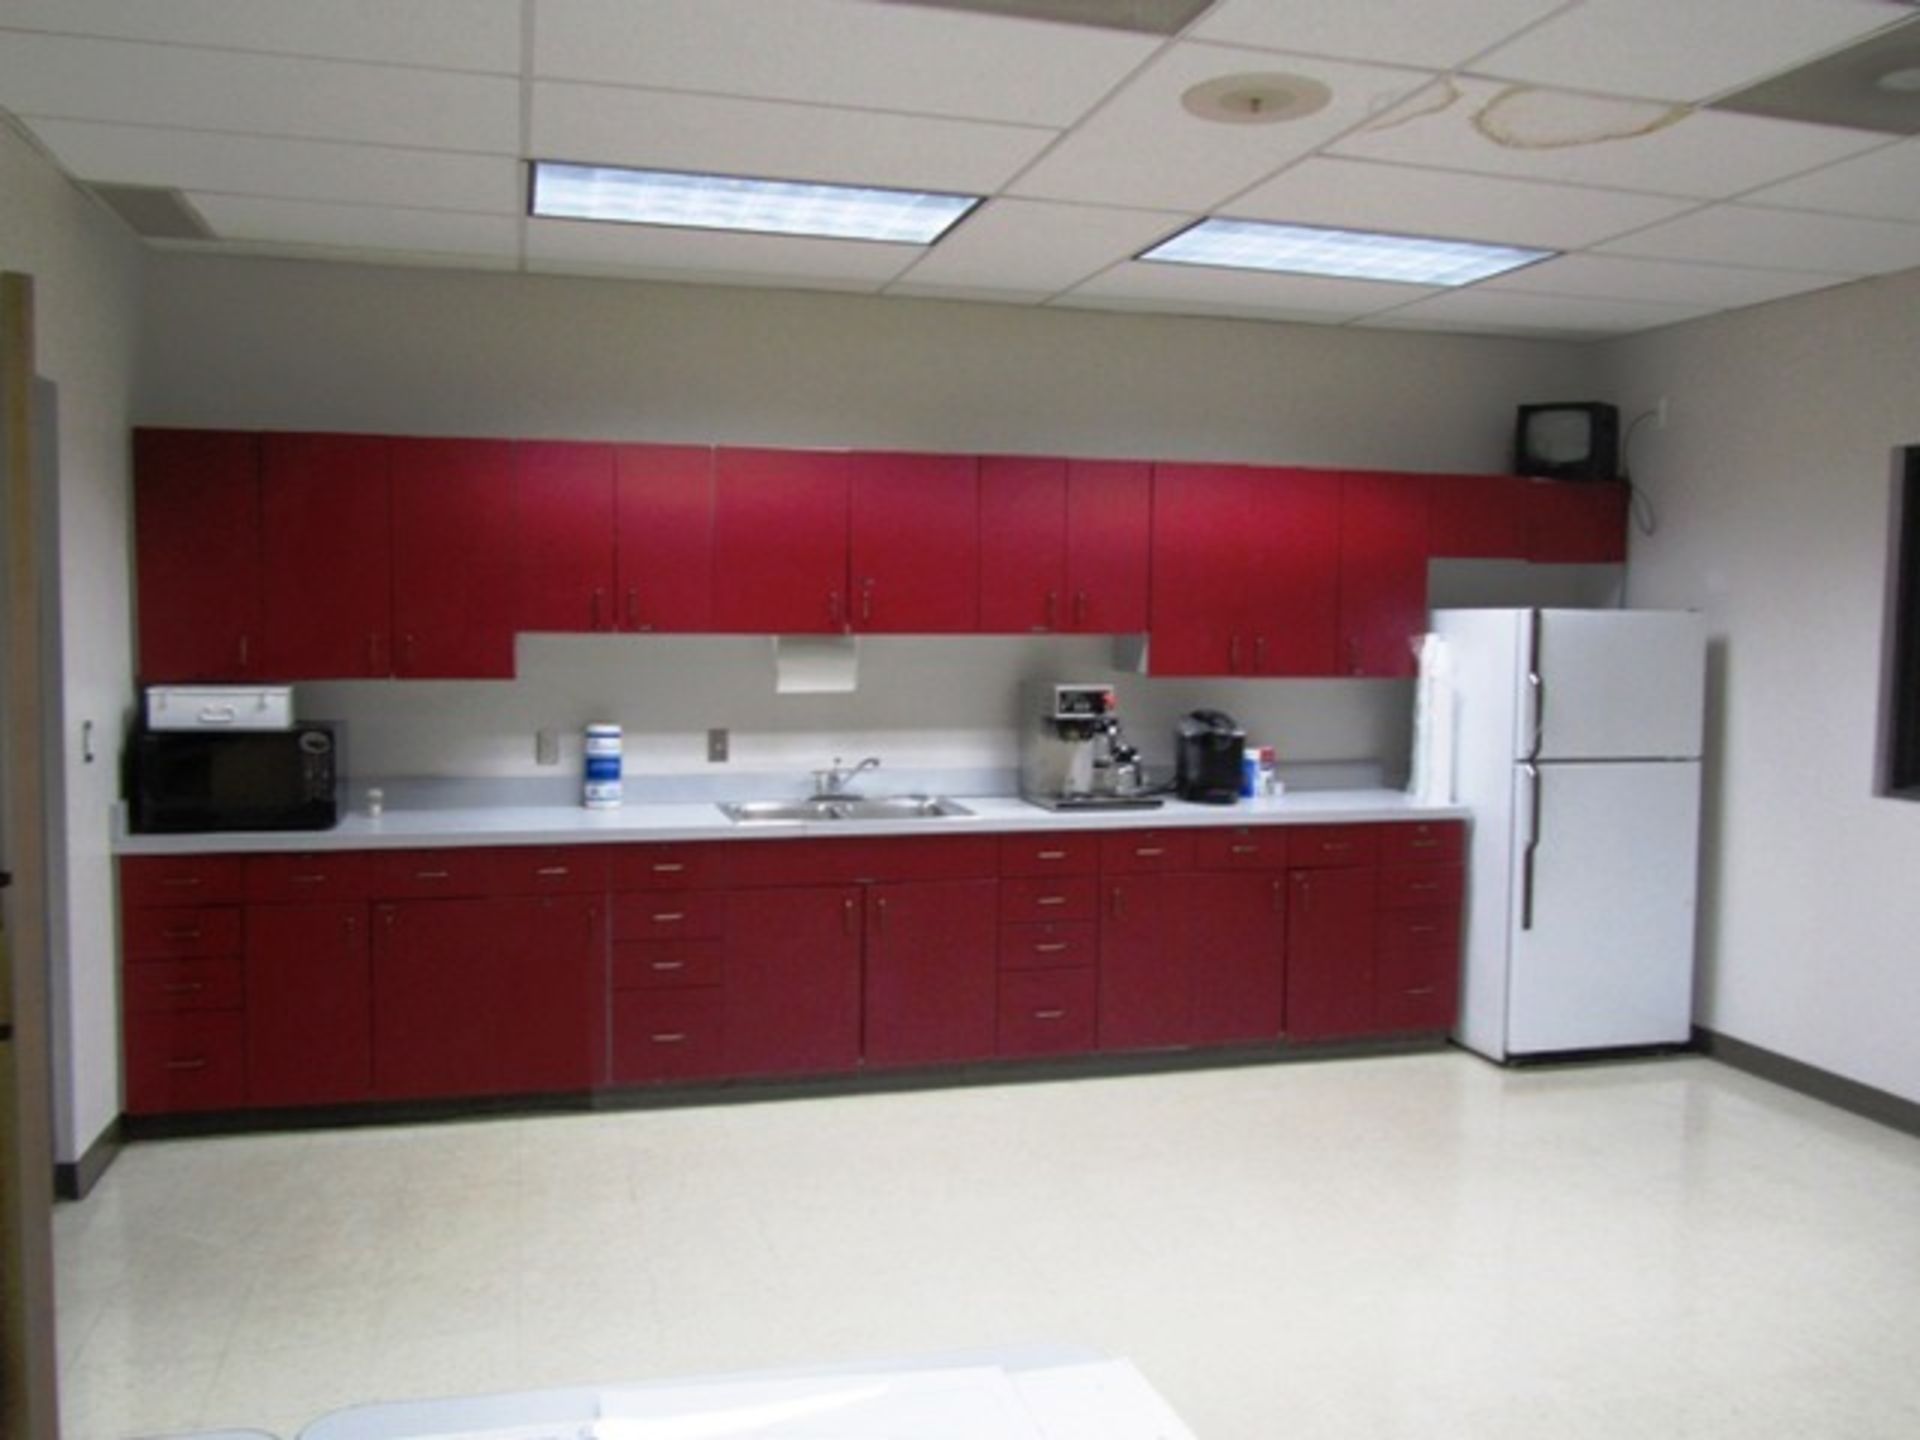 Contents of Breakroom consisting of Refrigerator/Freezer, Microwave, Brewmatic Coffee Maker